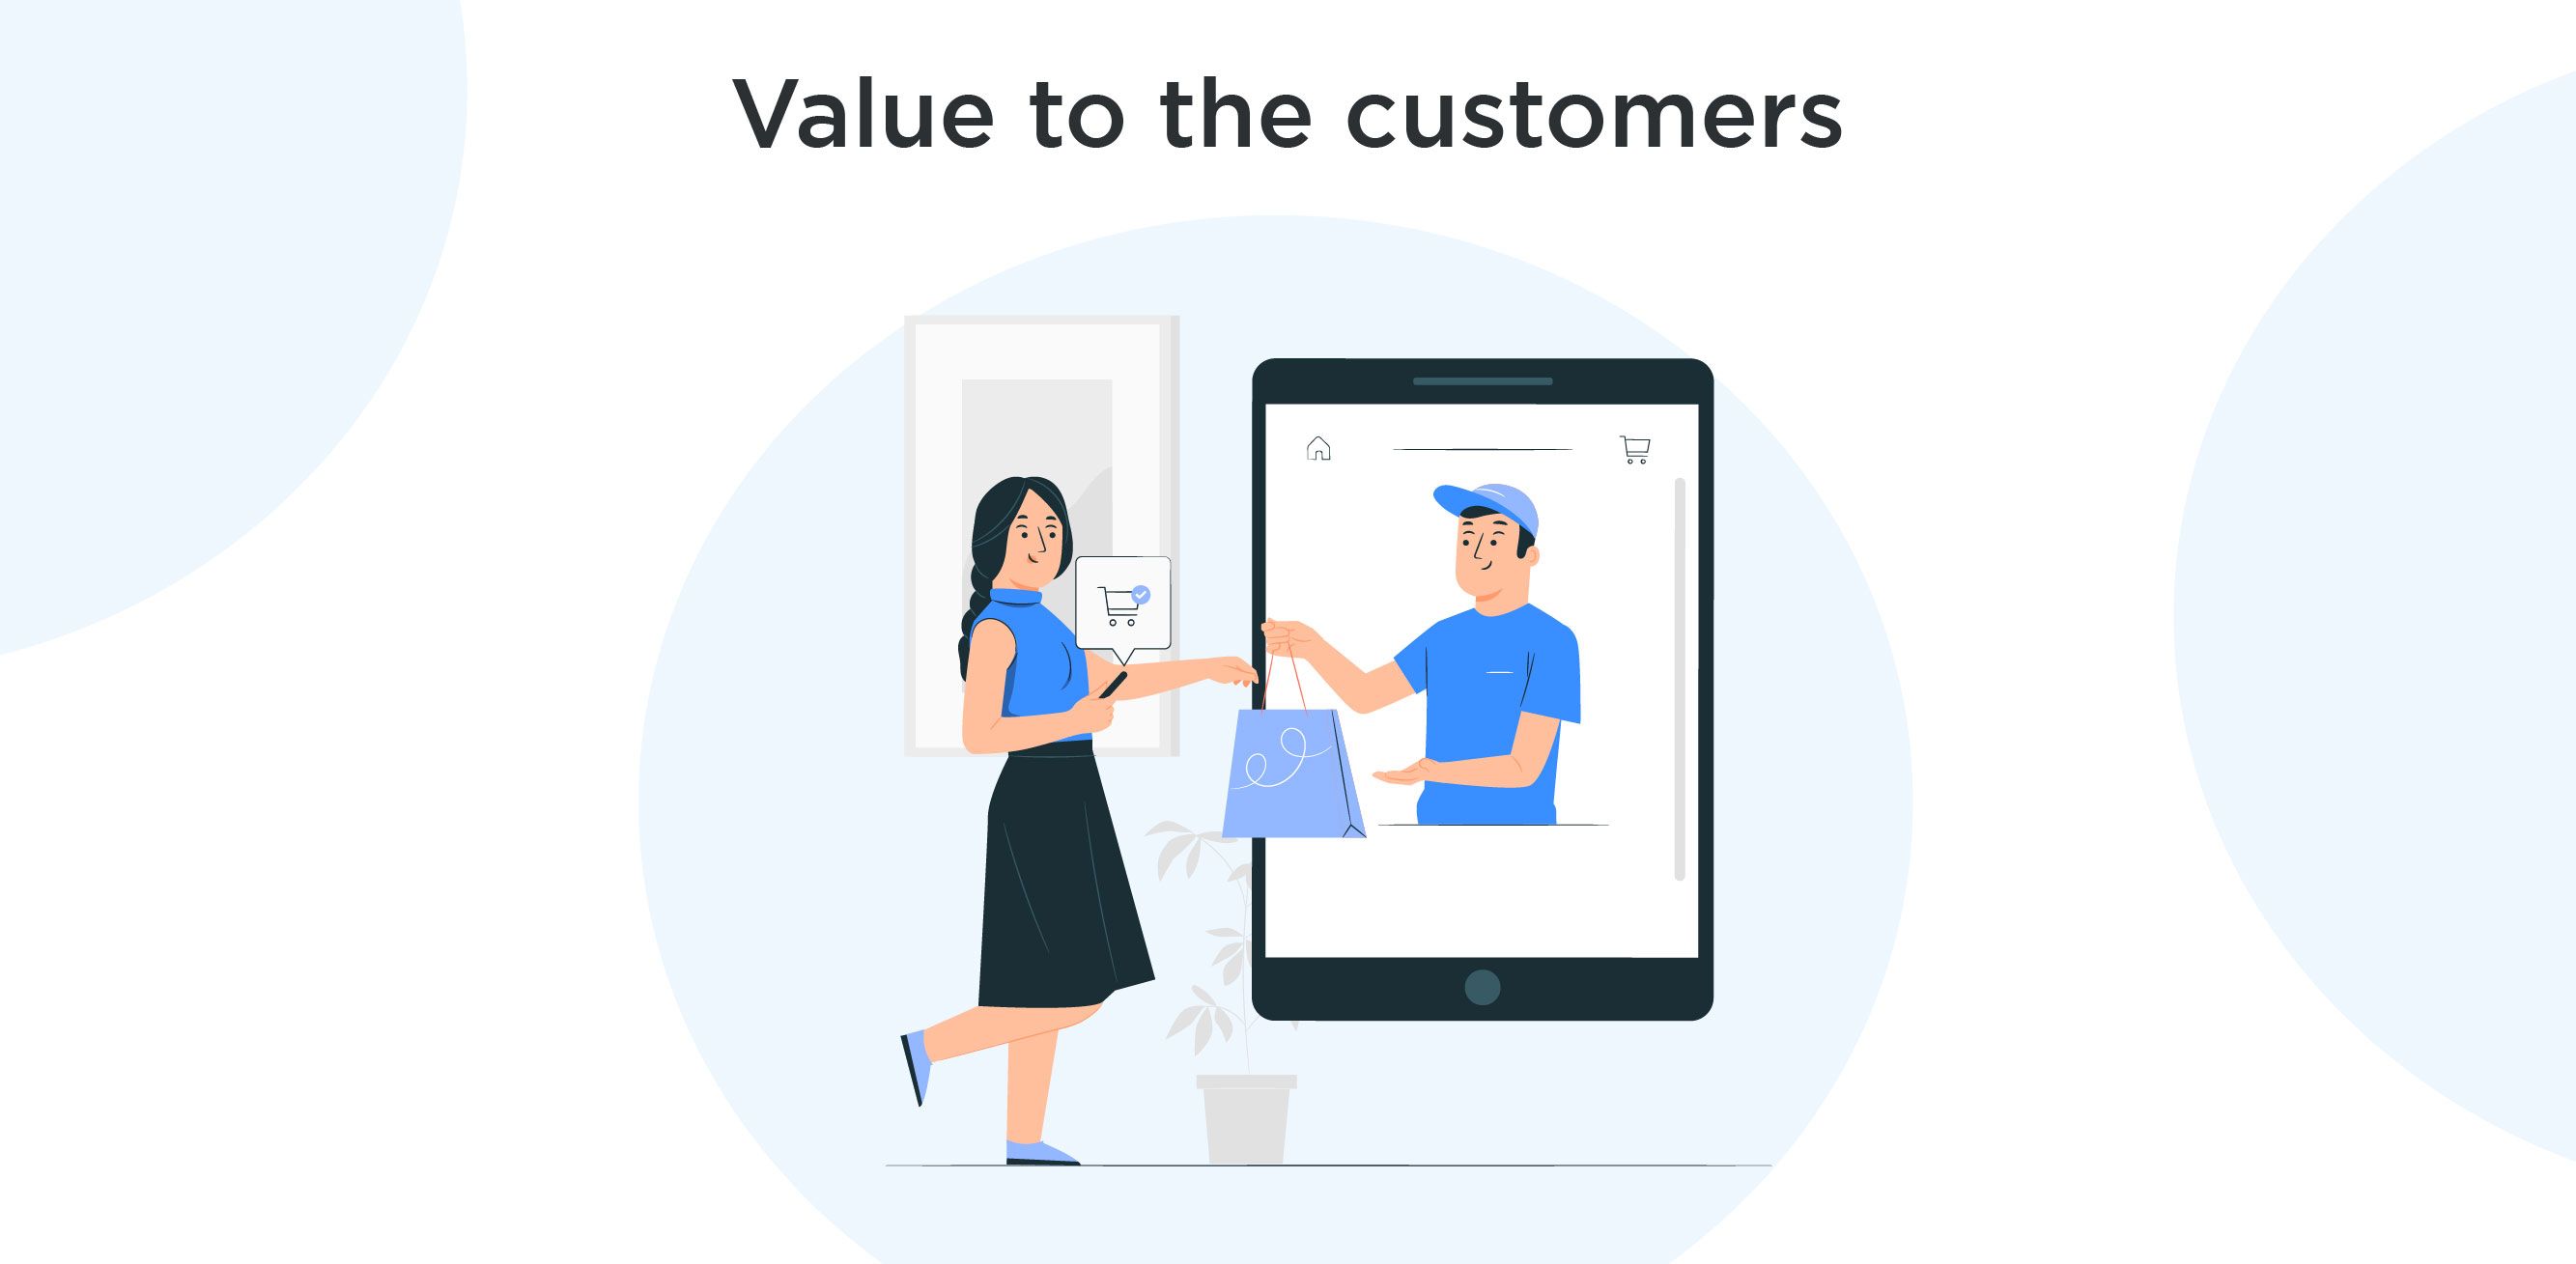 Value to the customers: